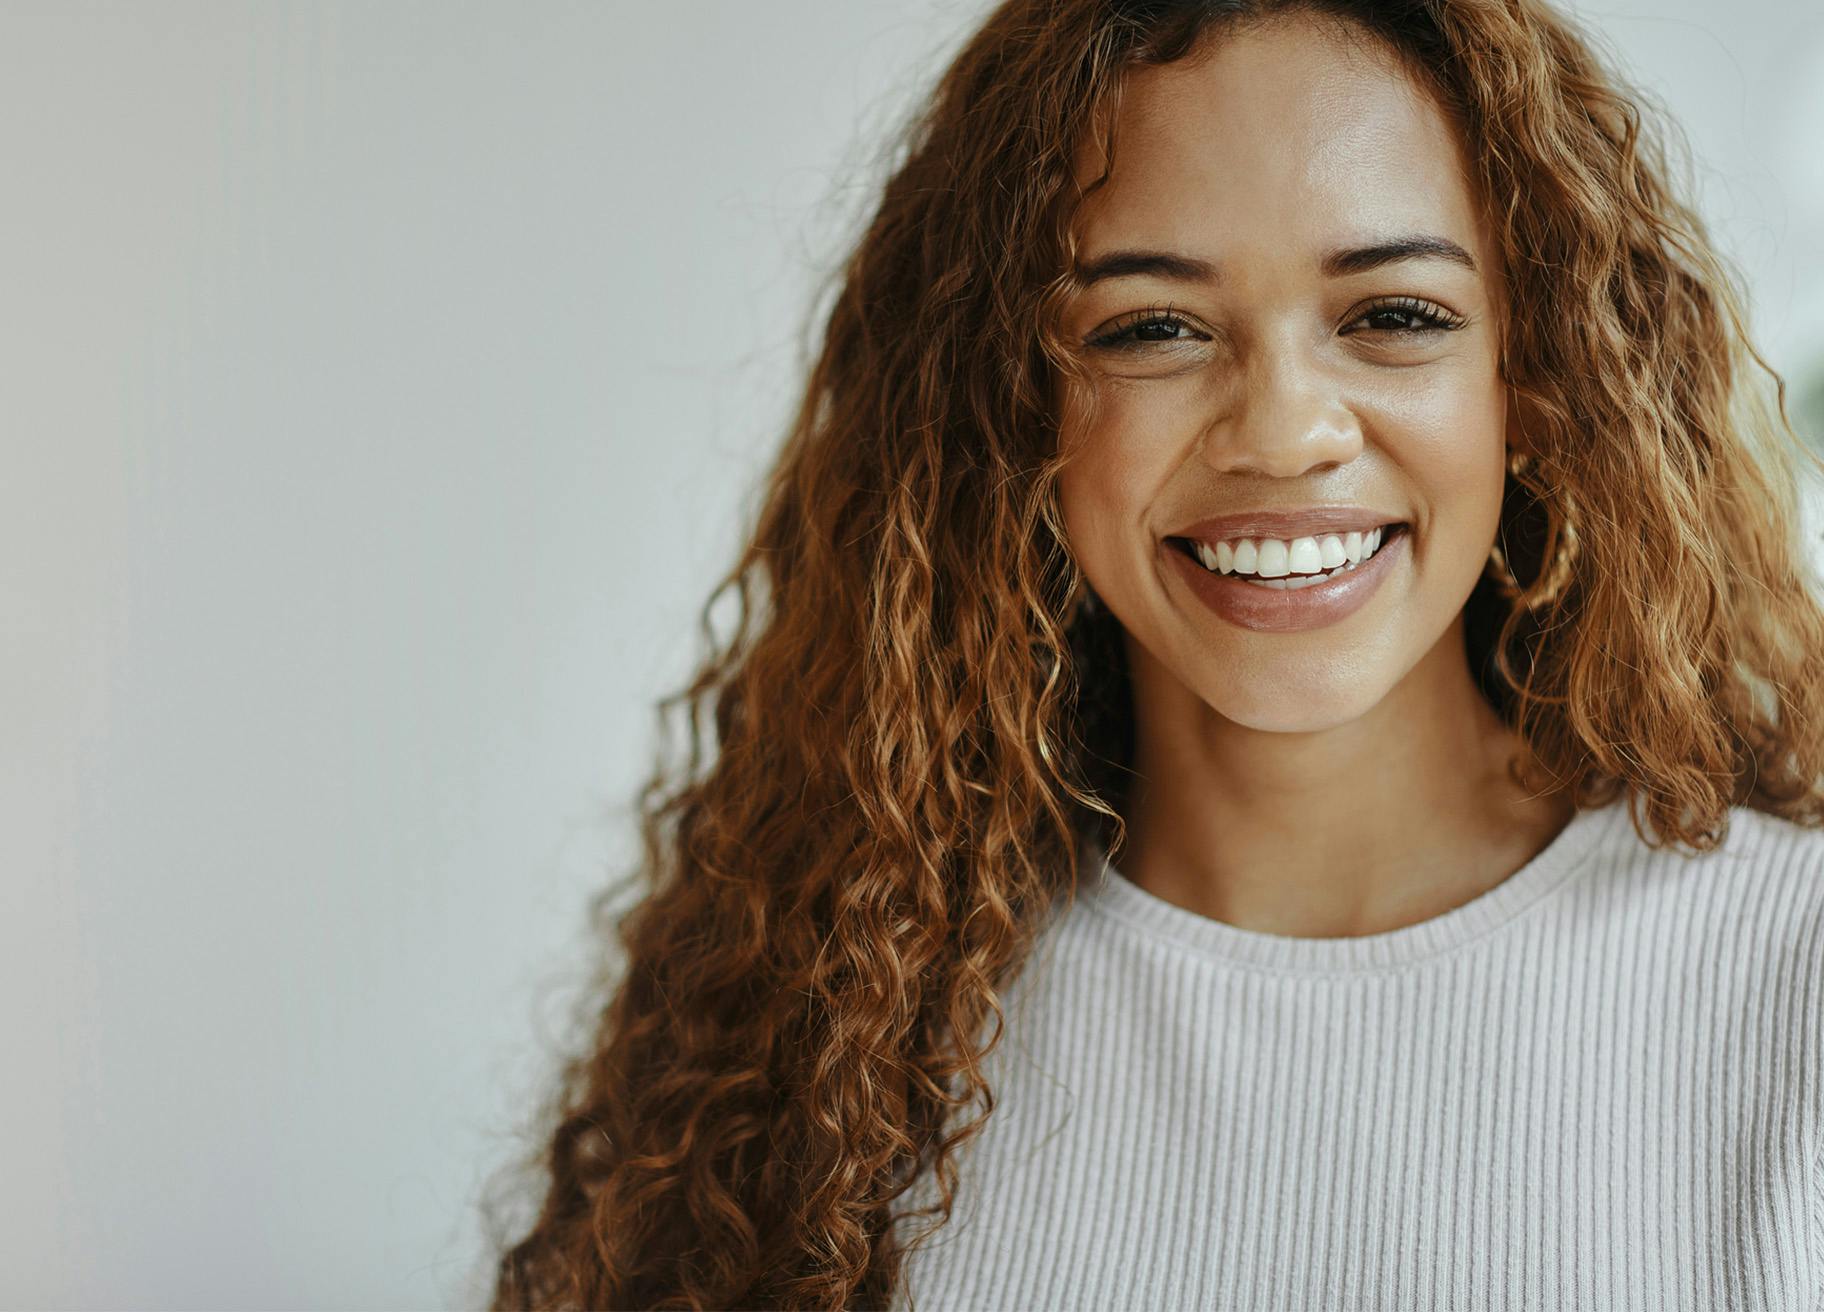 Woman with long curly hair smiling